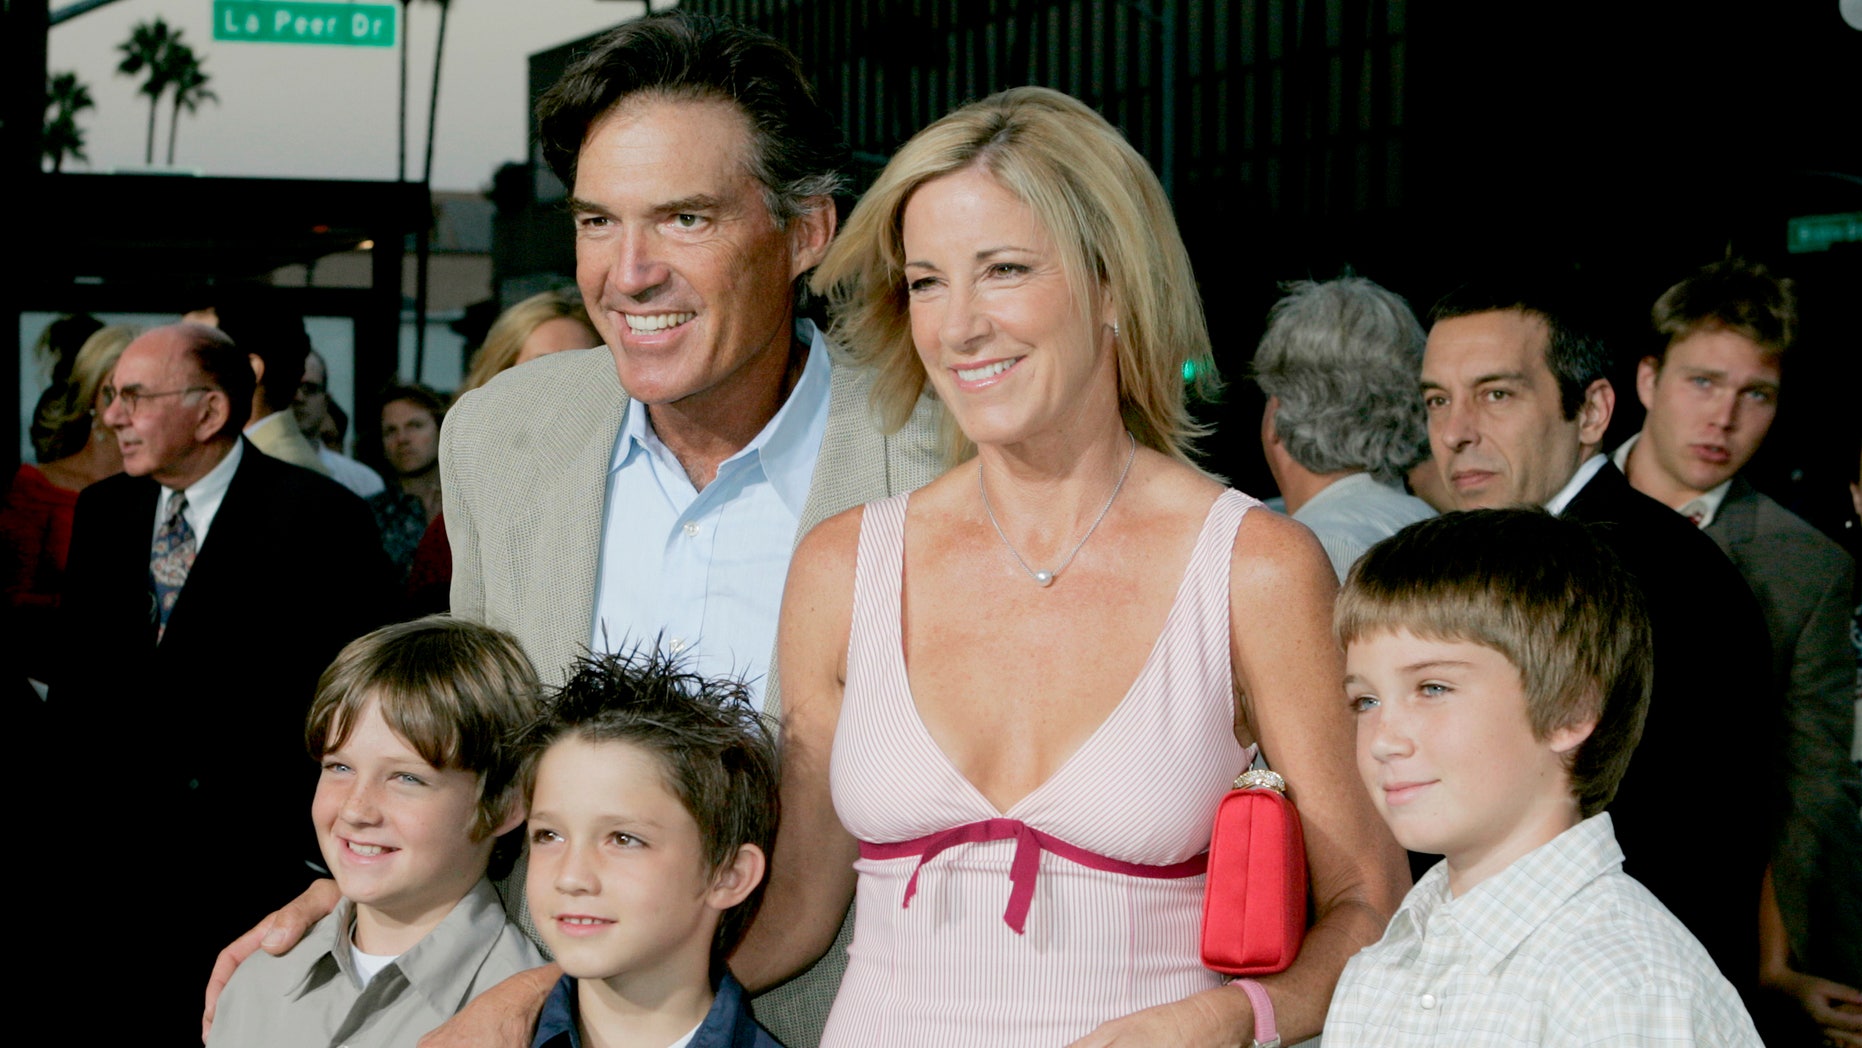 Tennis pro Chris Evert claims menopause ruined her marriage Fox News